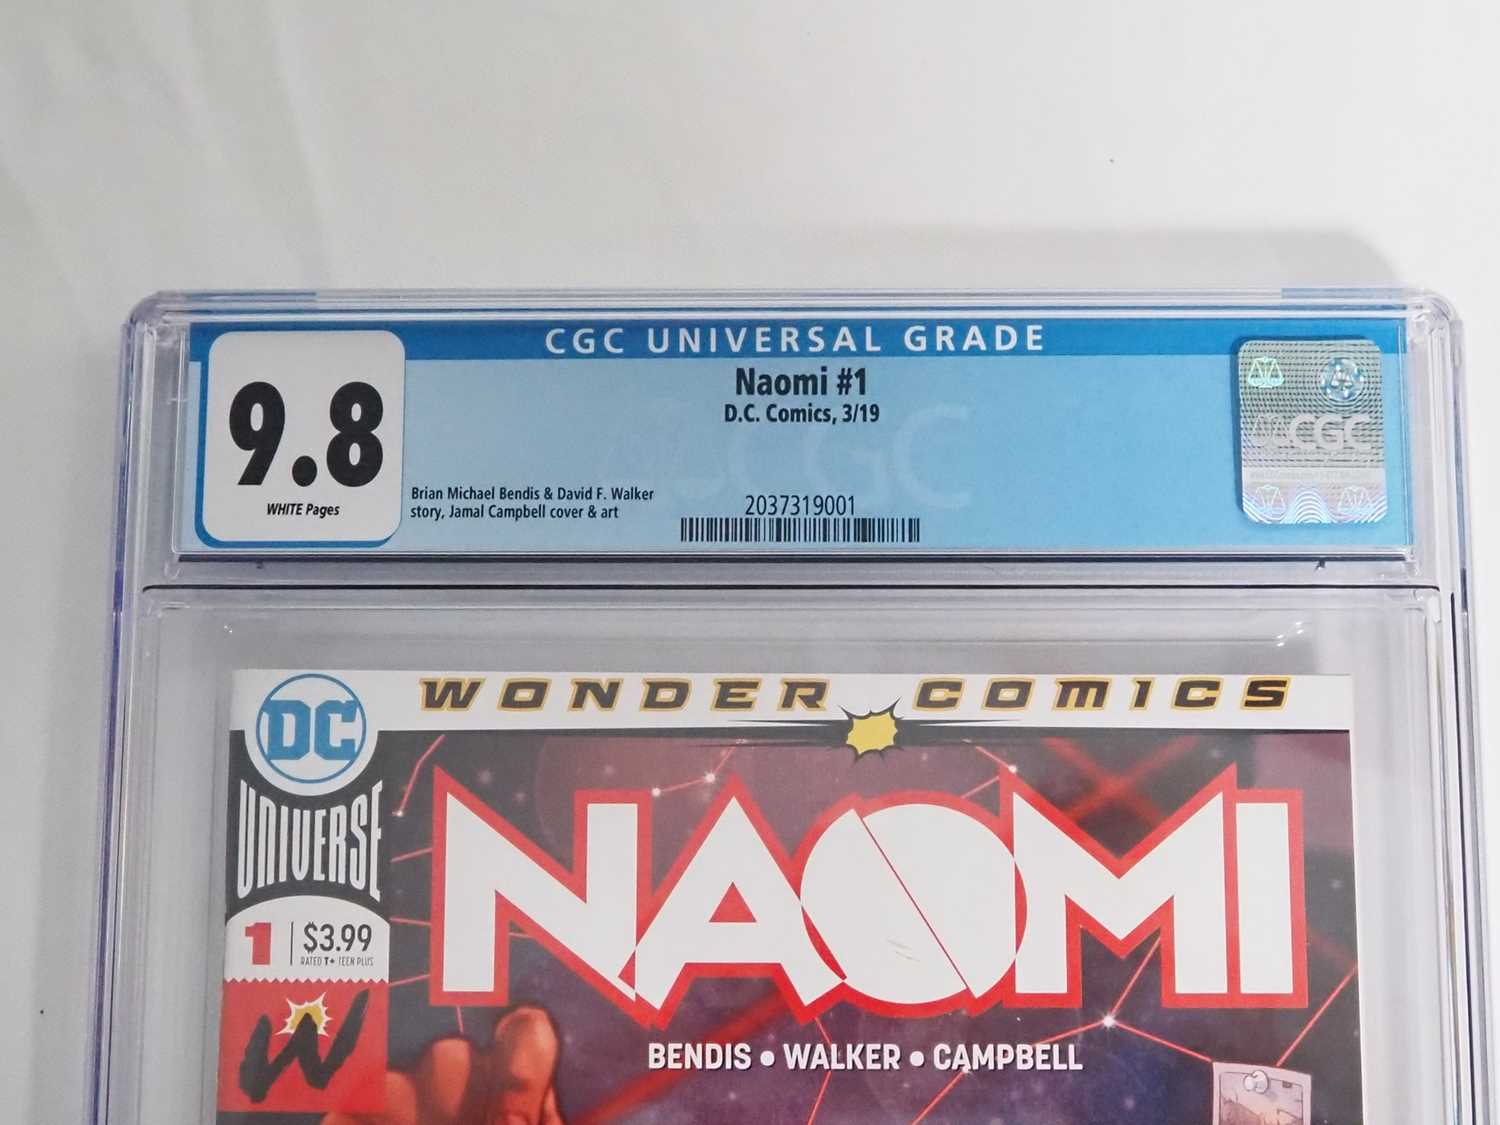 NAOMI #1, 2, 3, 4, 5 (5 in Lot) - (2019 - DC) - ALL GRADED 9.8 (NM/MINT) by CGC - First - Image 3 of 7